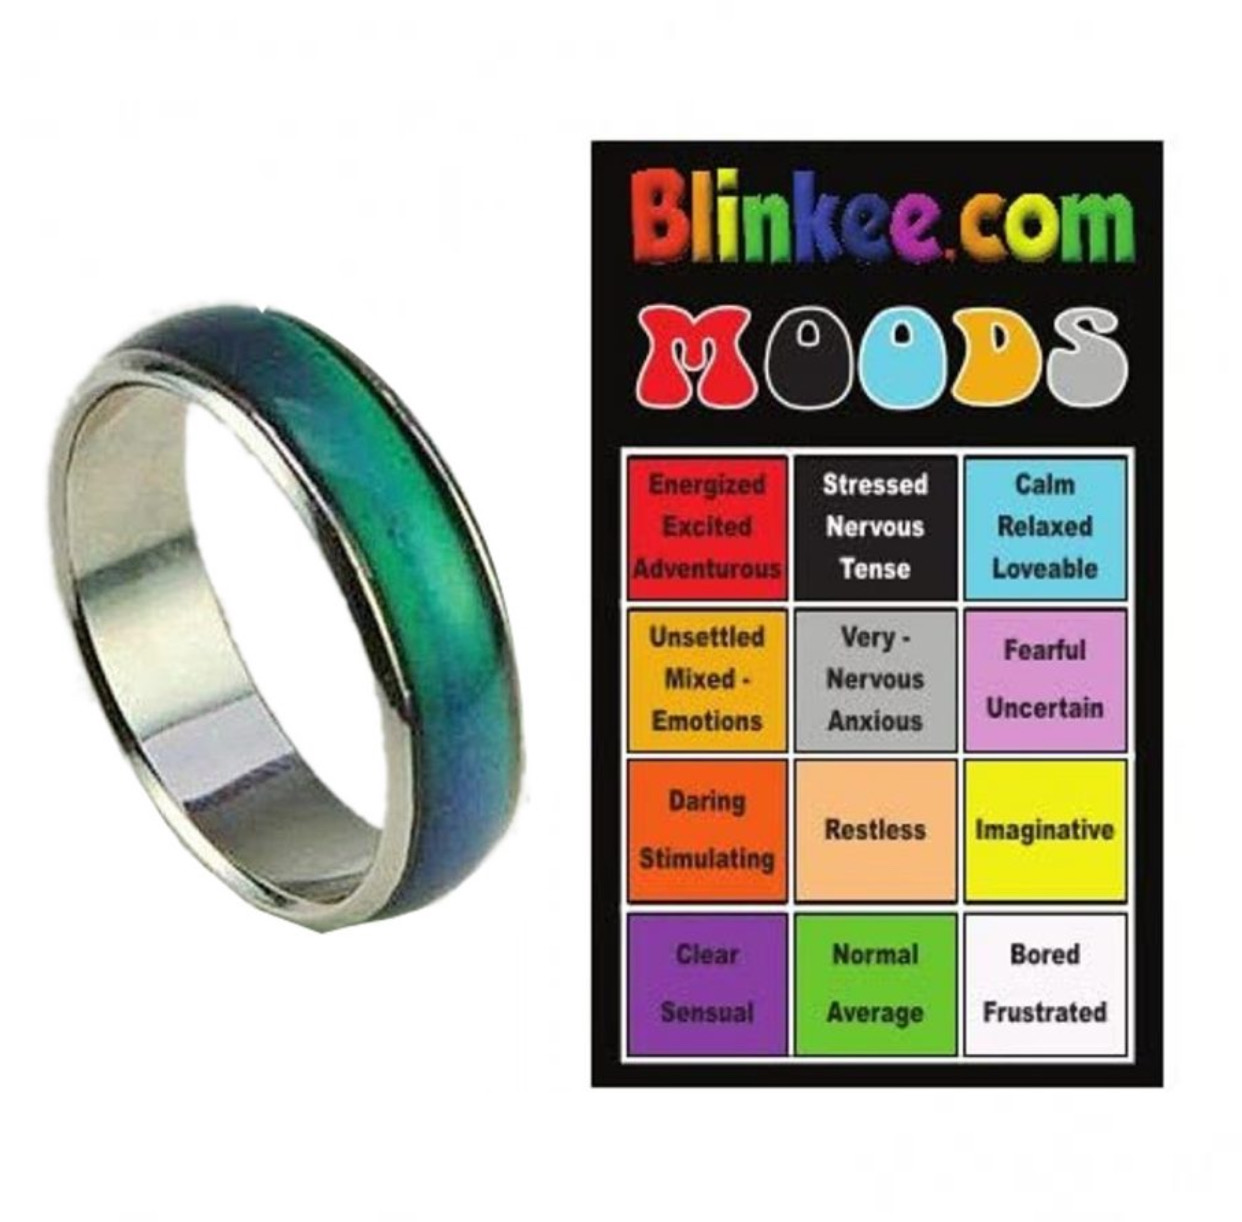 ACCHEN Mood Rings 12 constellation Changing Color Emotion Feeling Finger  Ring with a Box (Aquarius)|Amazon.com